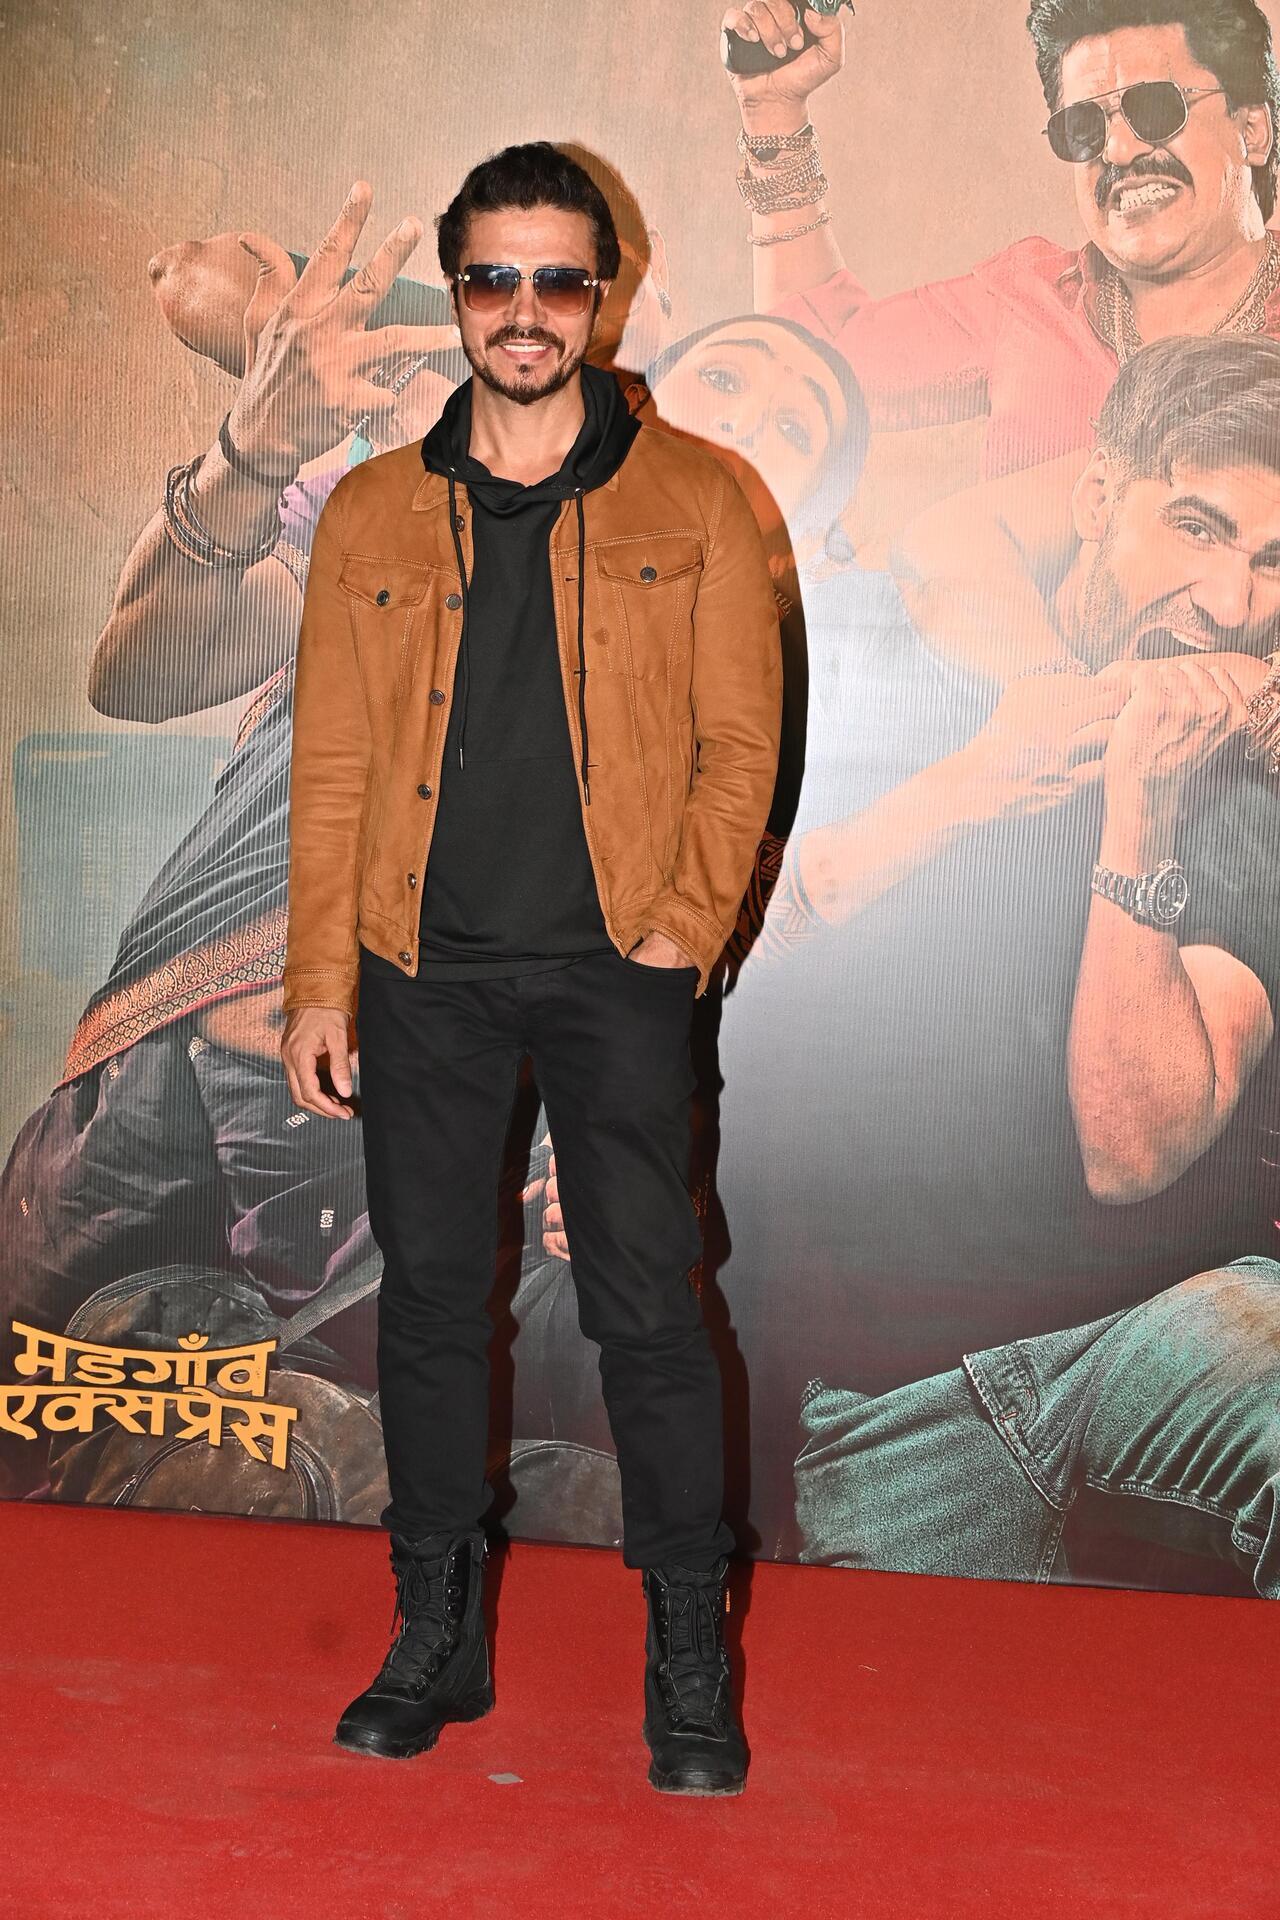 Darshan Kumar was clicked as he came to watch Kunal Kemmu's directorial debut